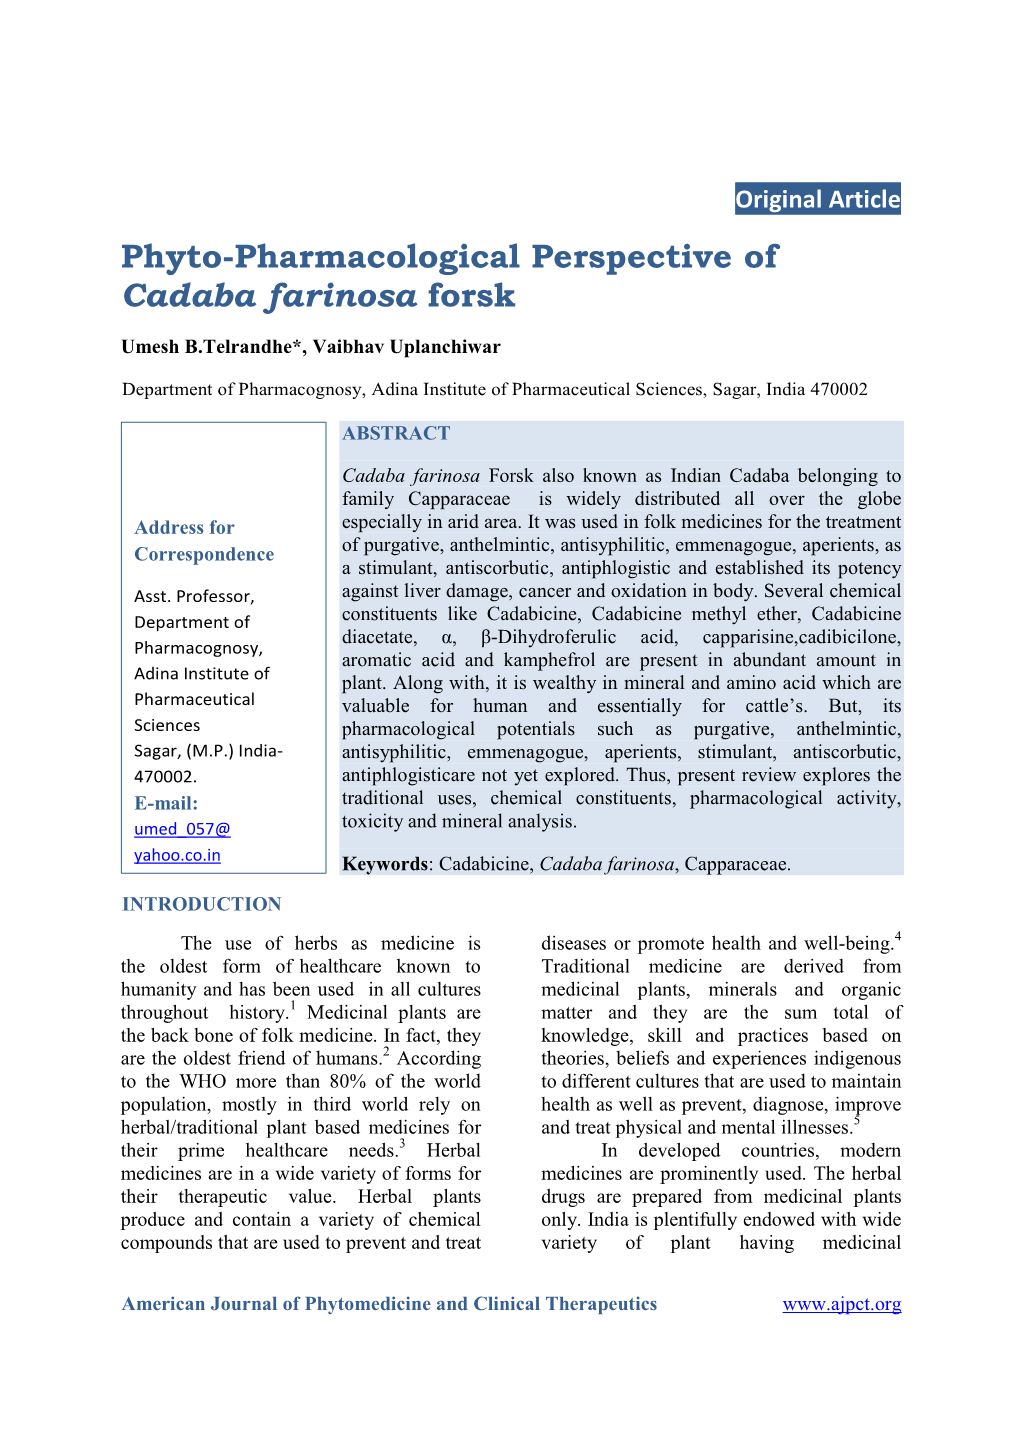 Phyto-Pharmacological Perspective of Cadaba Farinosa Forsk